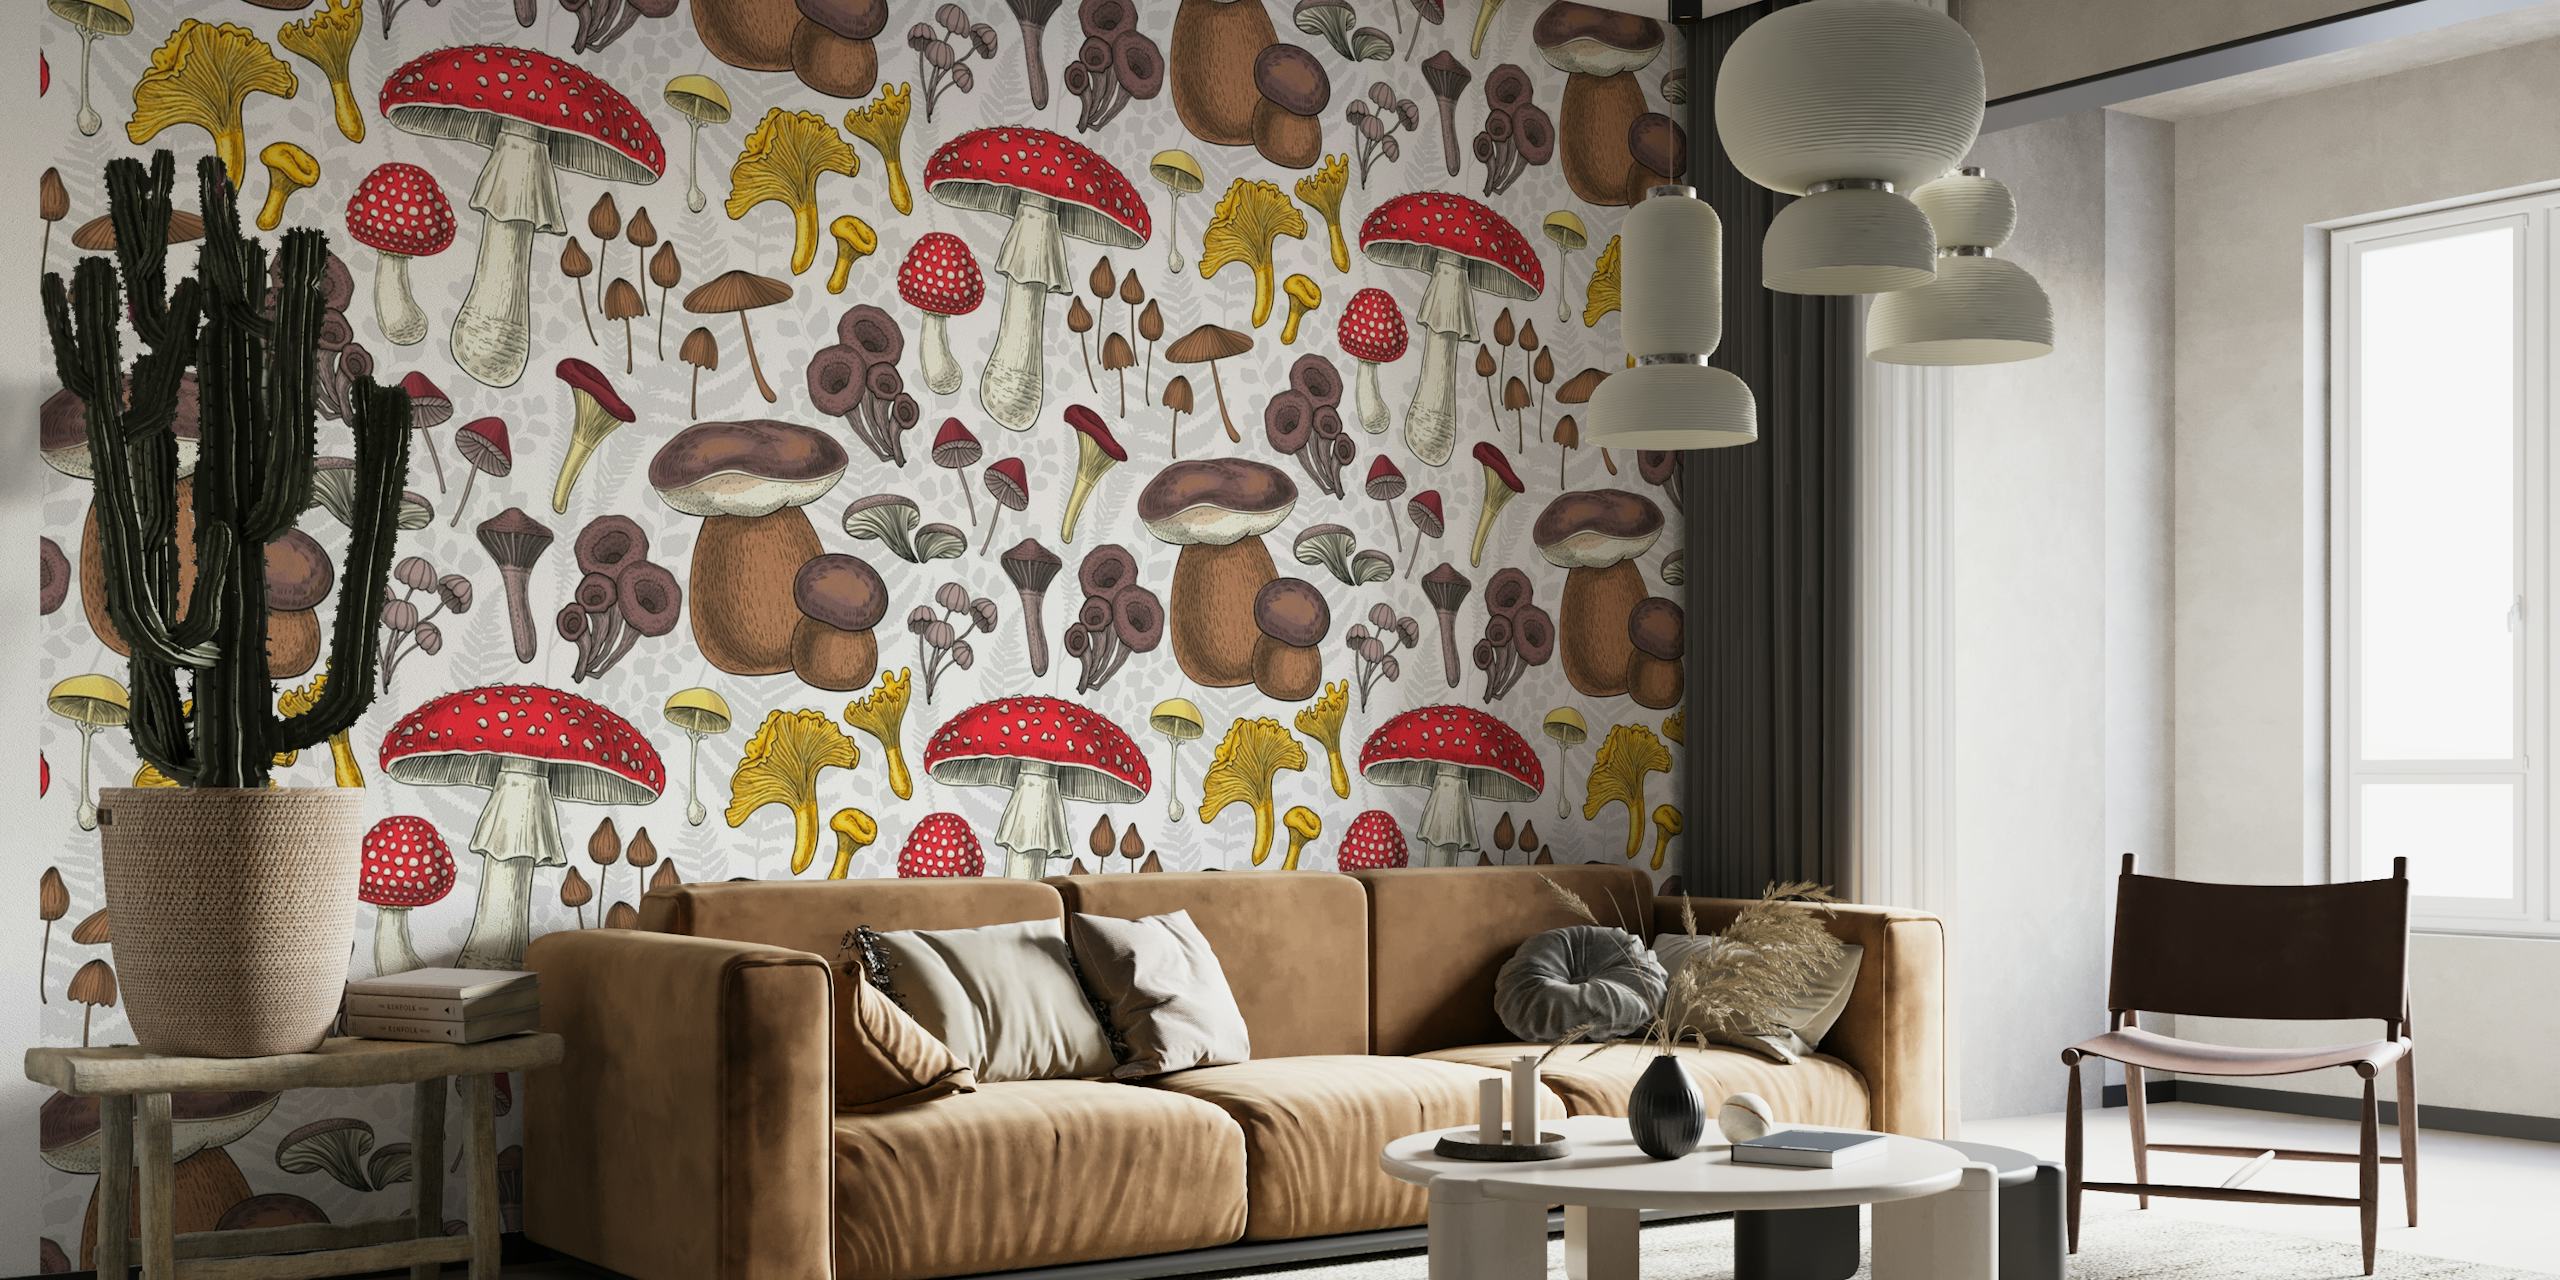 Wild mushrooms wall mural with a variety of colorful fungi